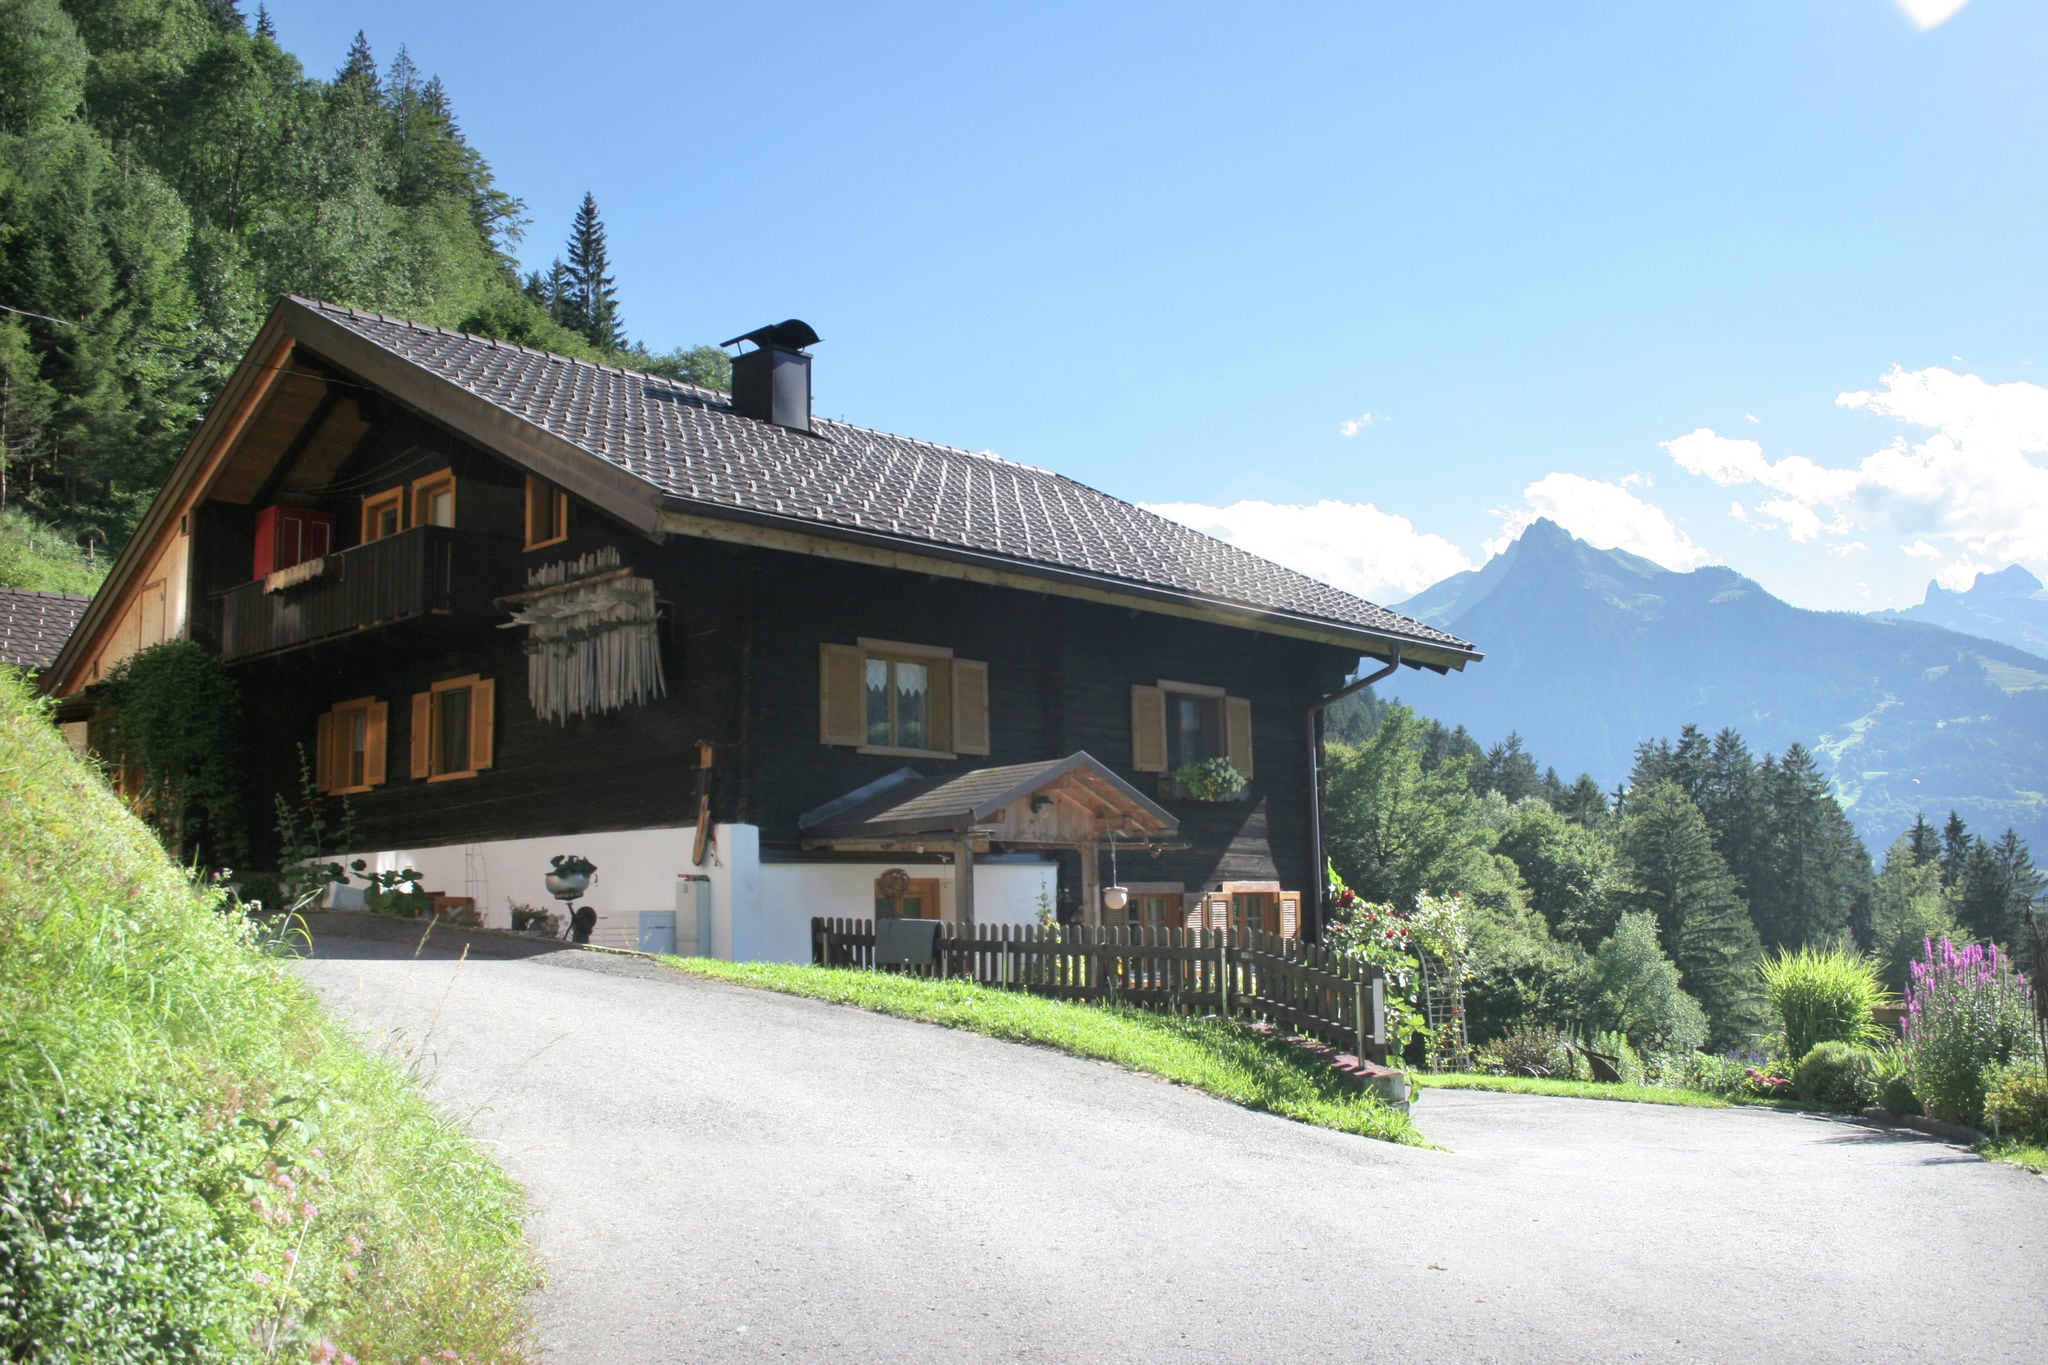 Apartment with view of Schruns